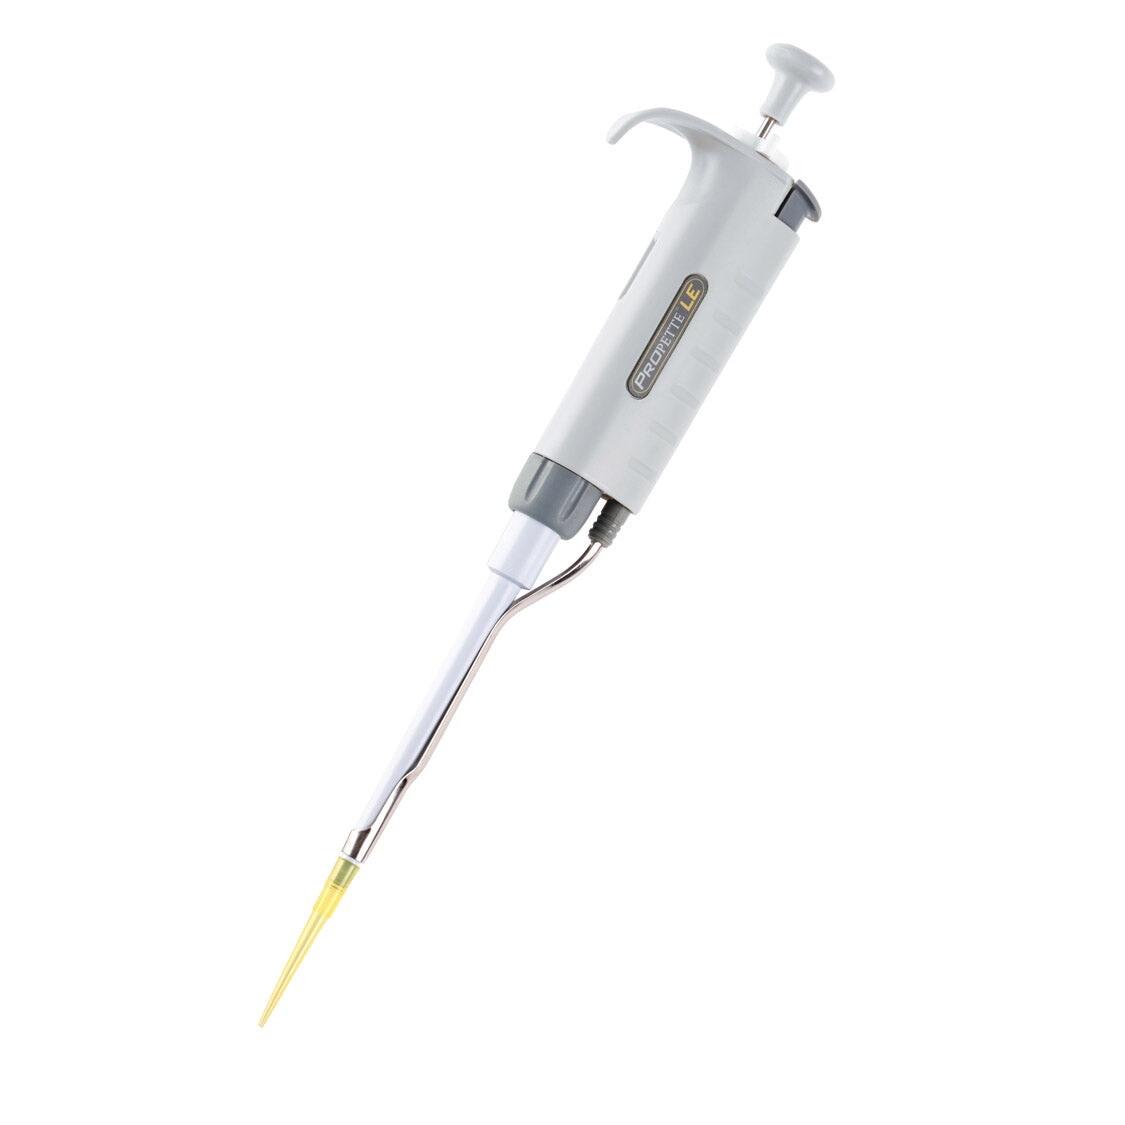 MTC Bio P5200-10M ProPette LE Single Channel Pipette, 1 to 10mL (does not come with ejector)